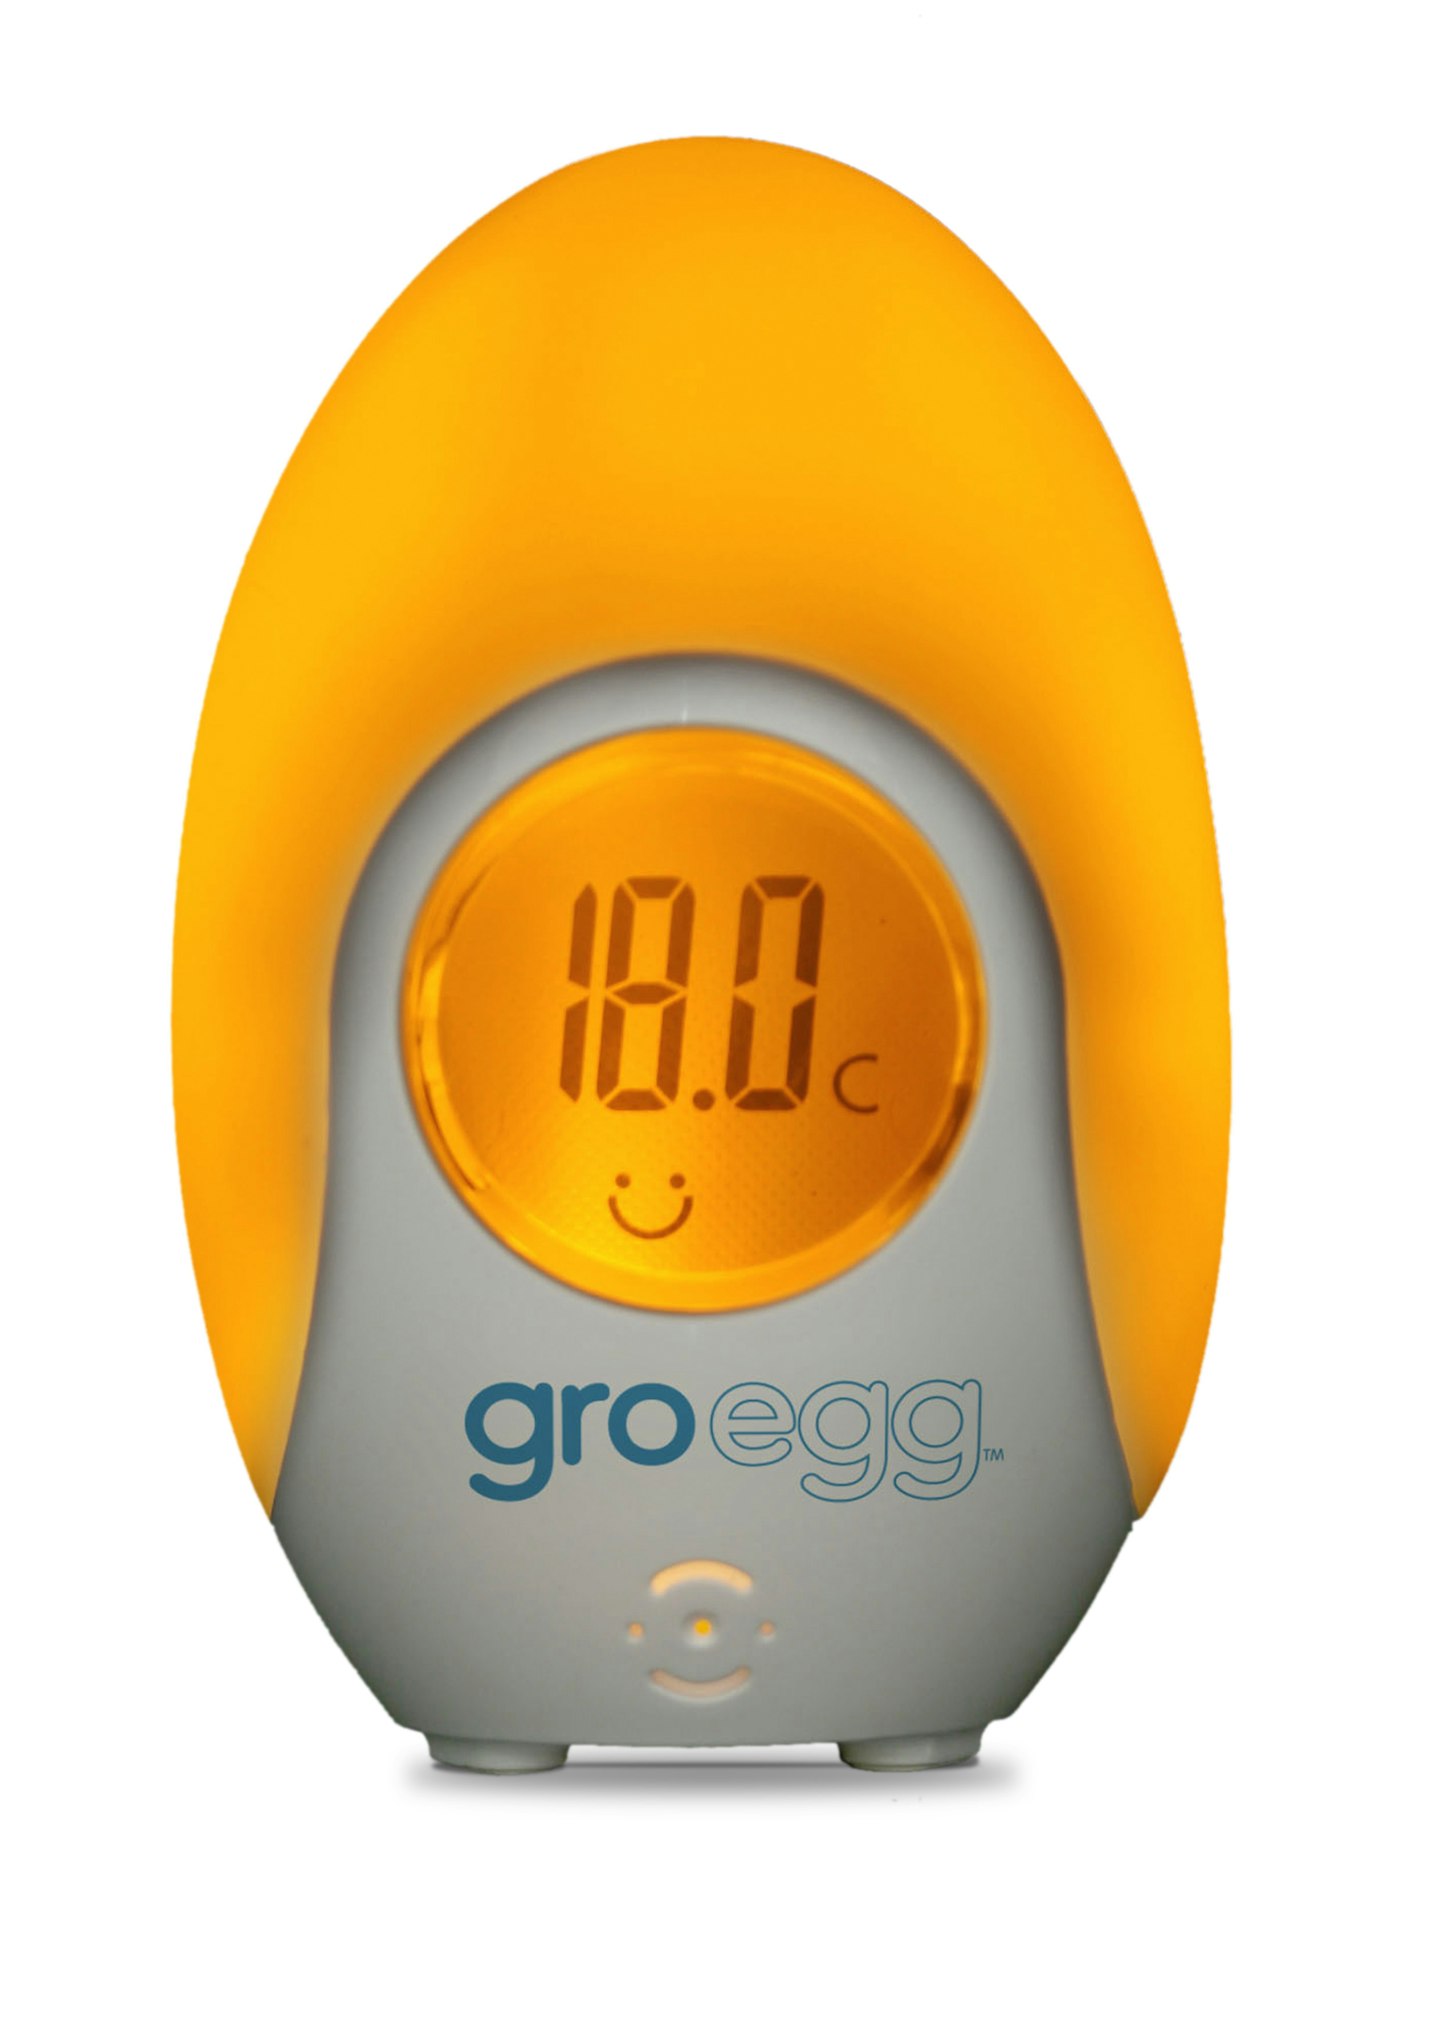 The Gro Egg: Our Review